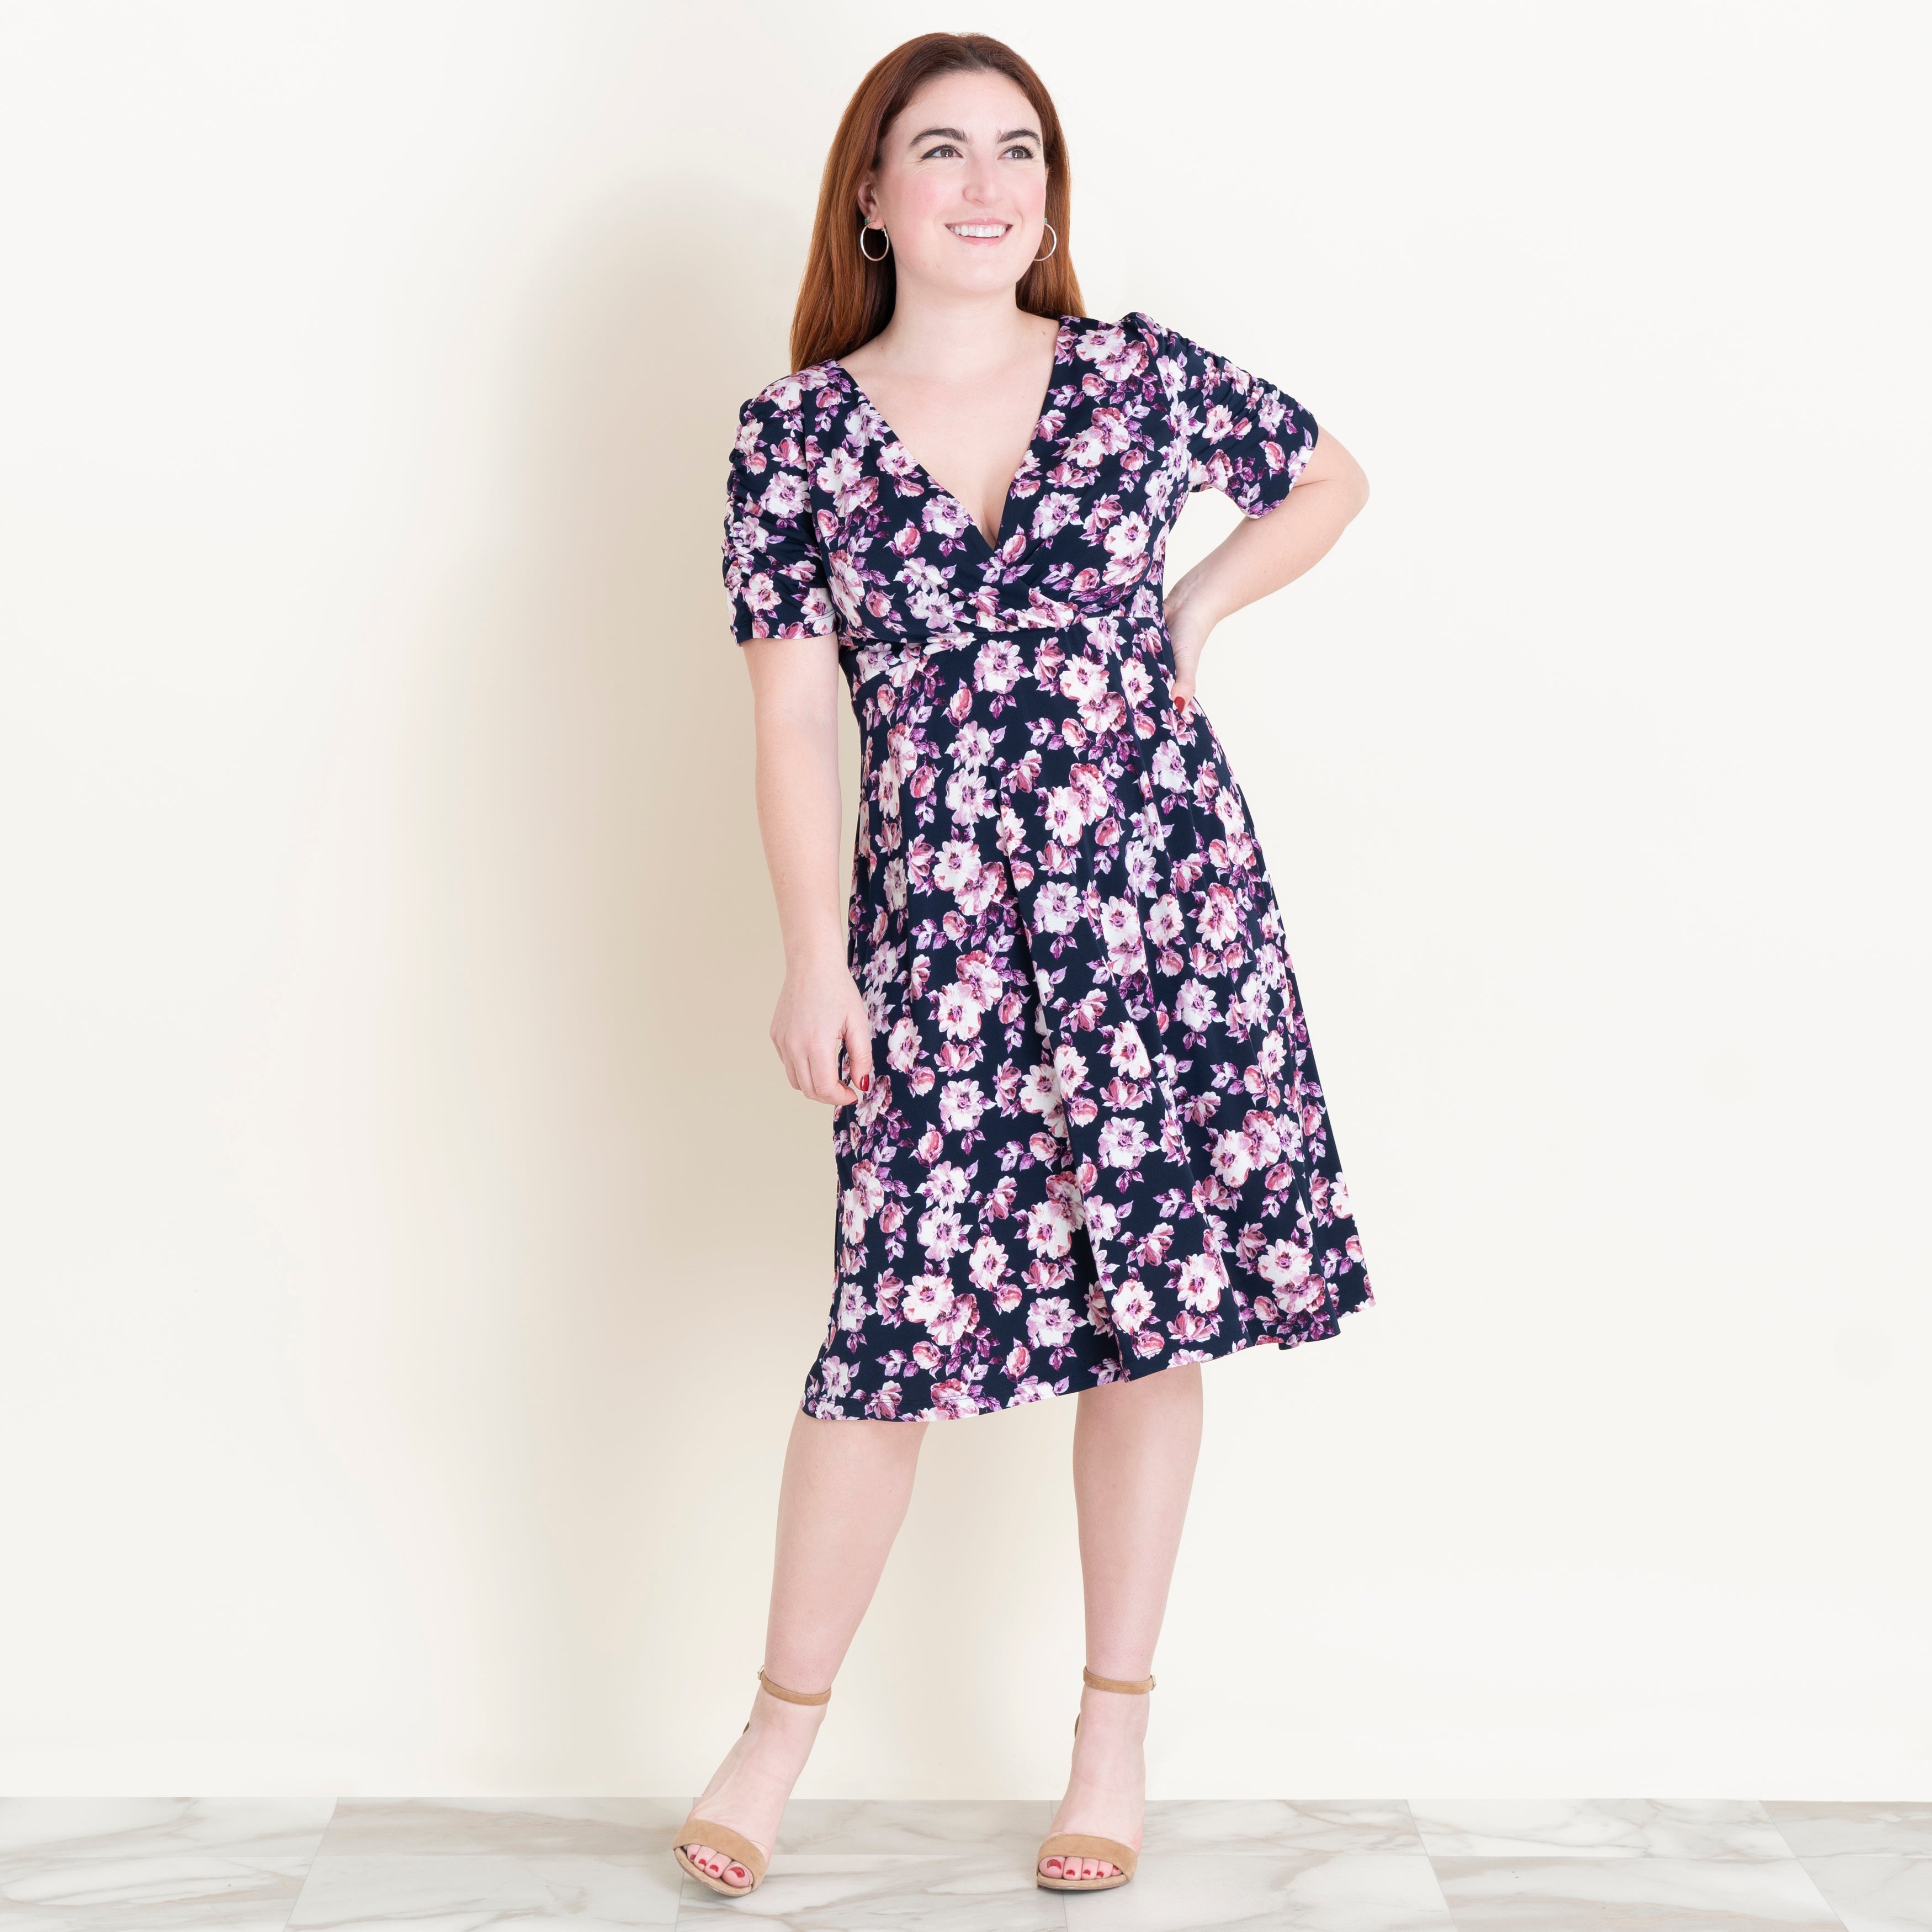 Woman posing wearing Navy/Mauve Valerie Floral Fit and Flare Dress from Connected Apparel